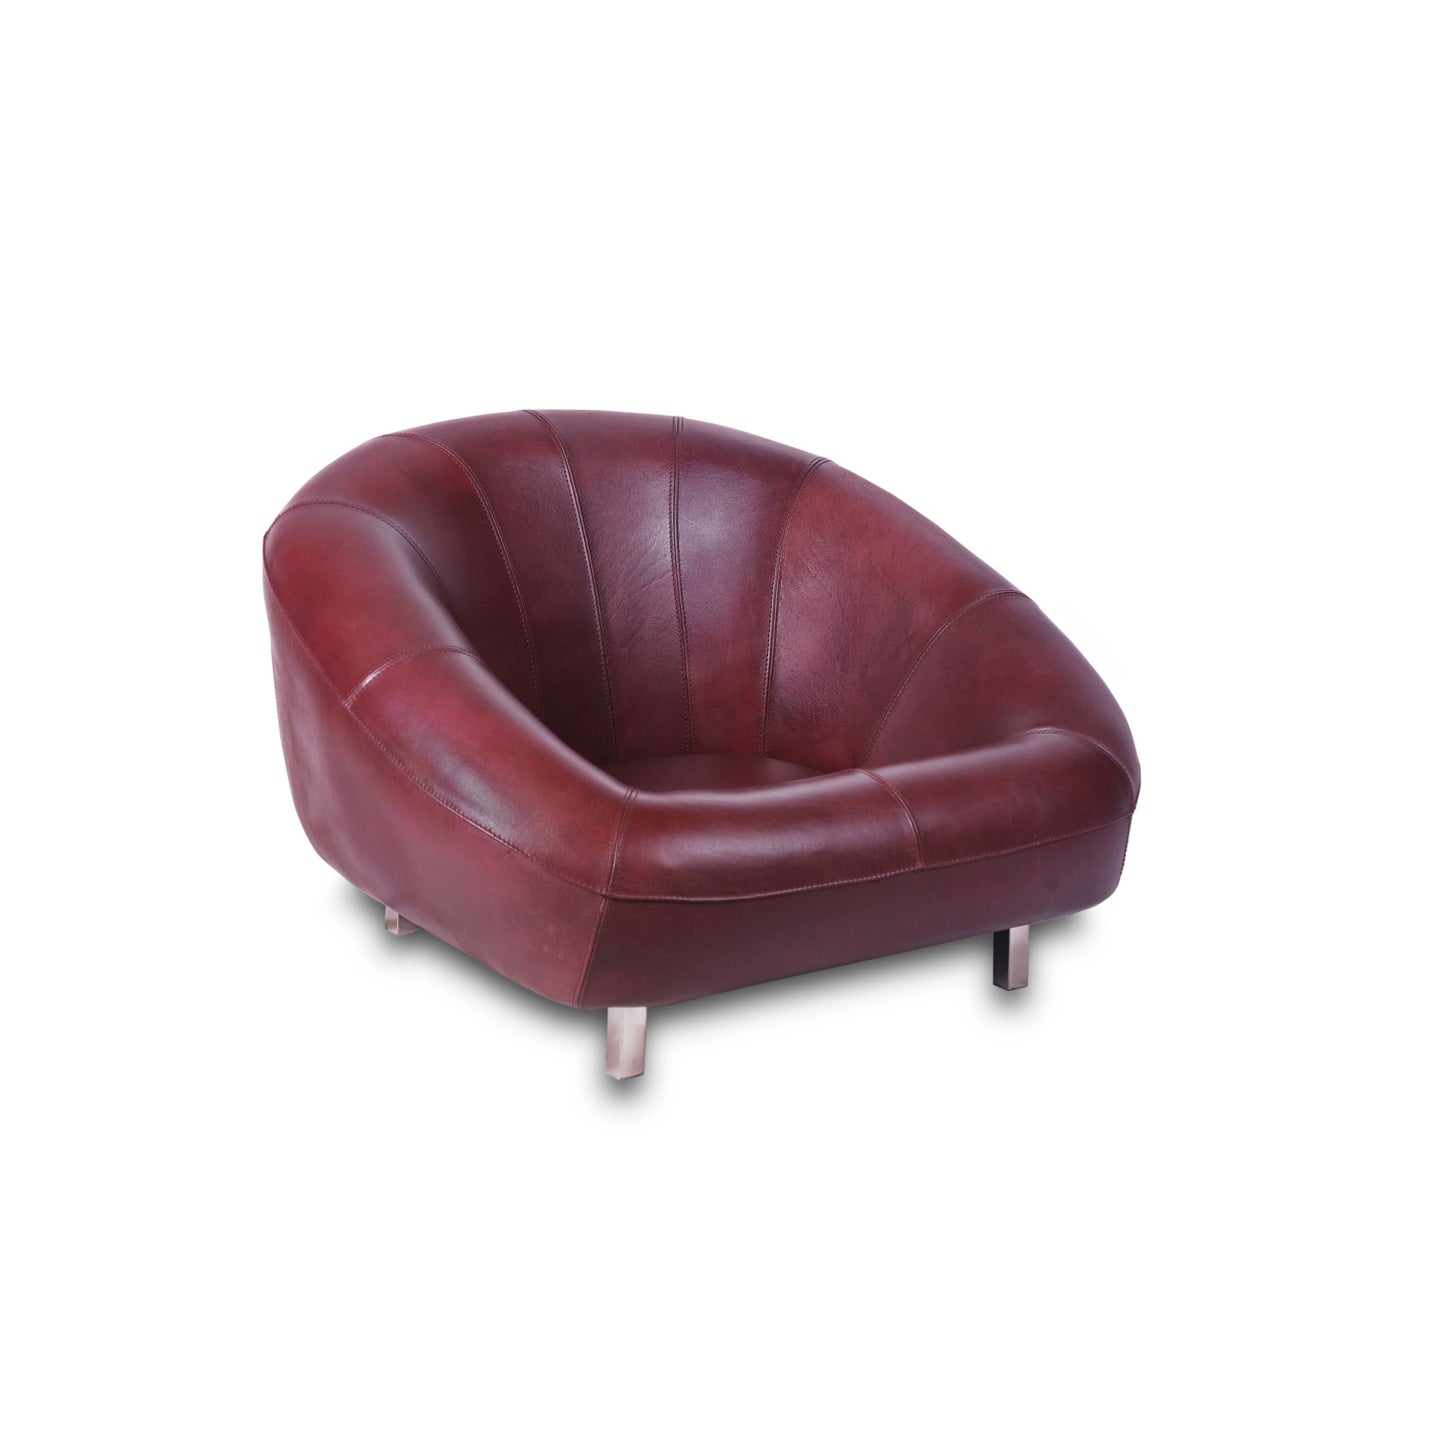 Genuine Leather Low Seating Cushioned Chair In Burgundy Colour